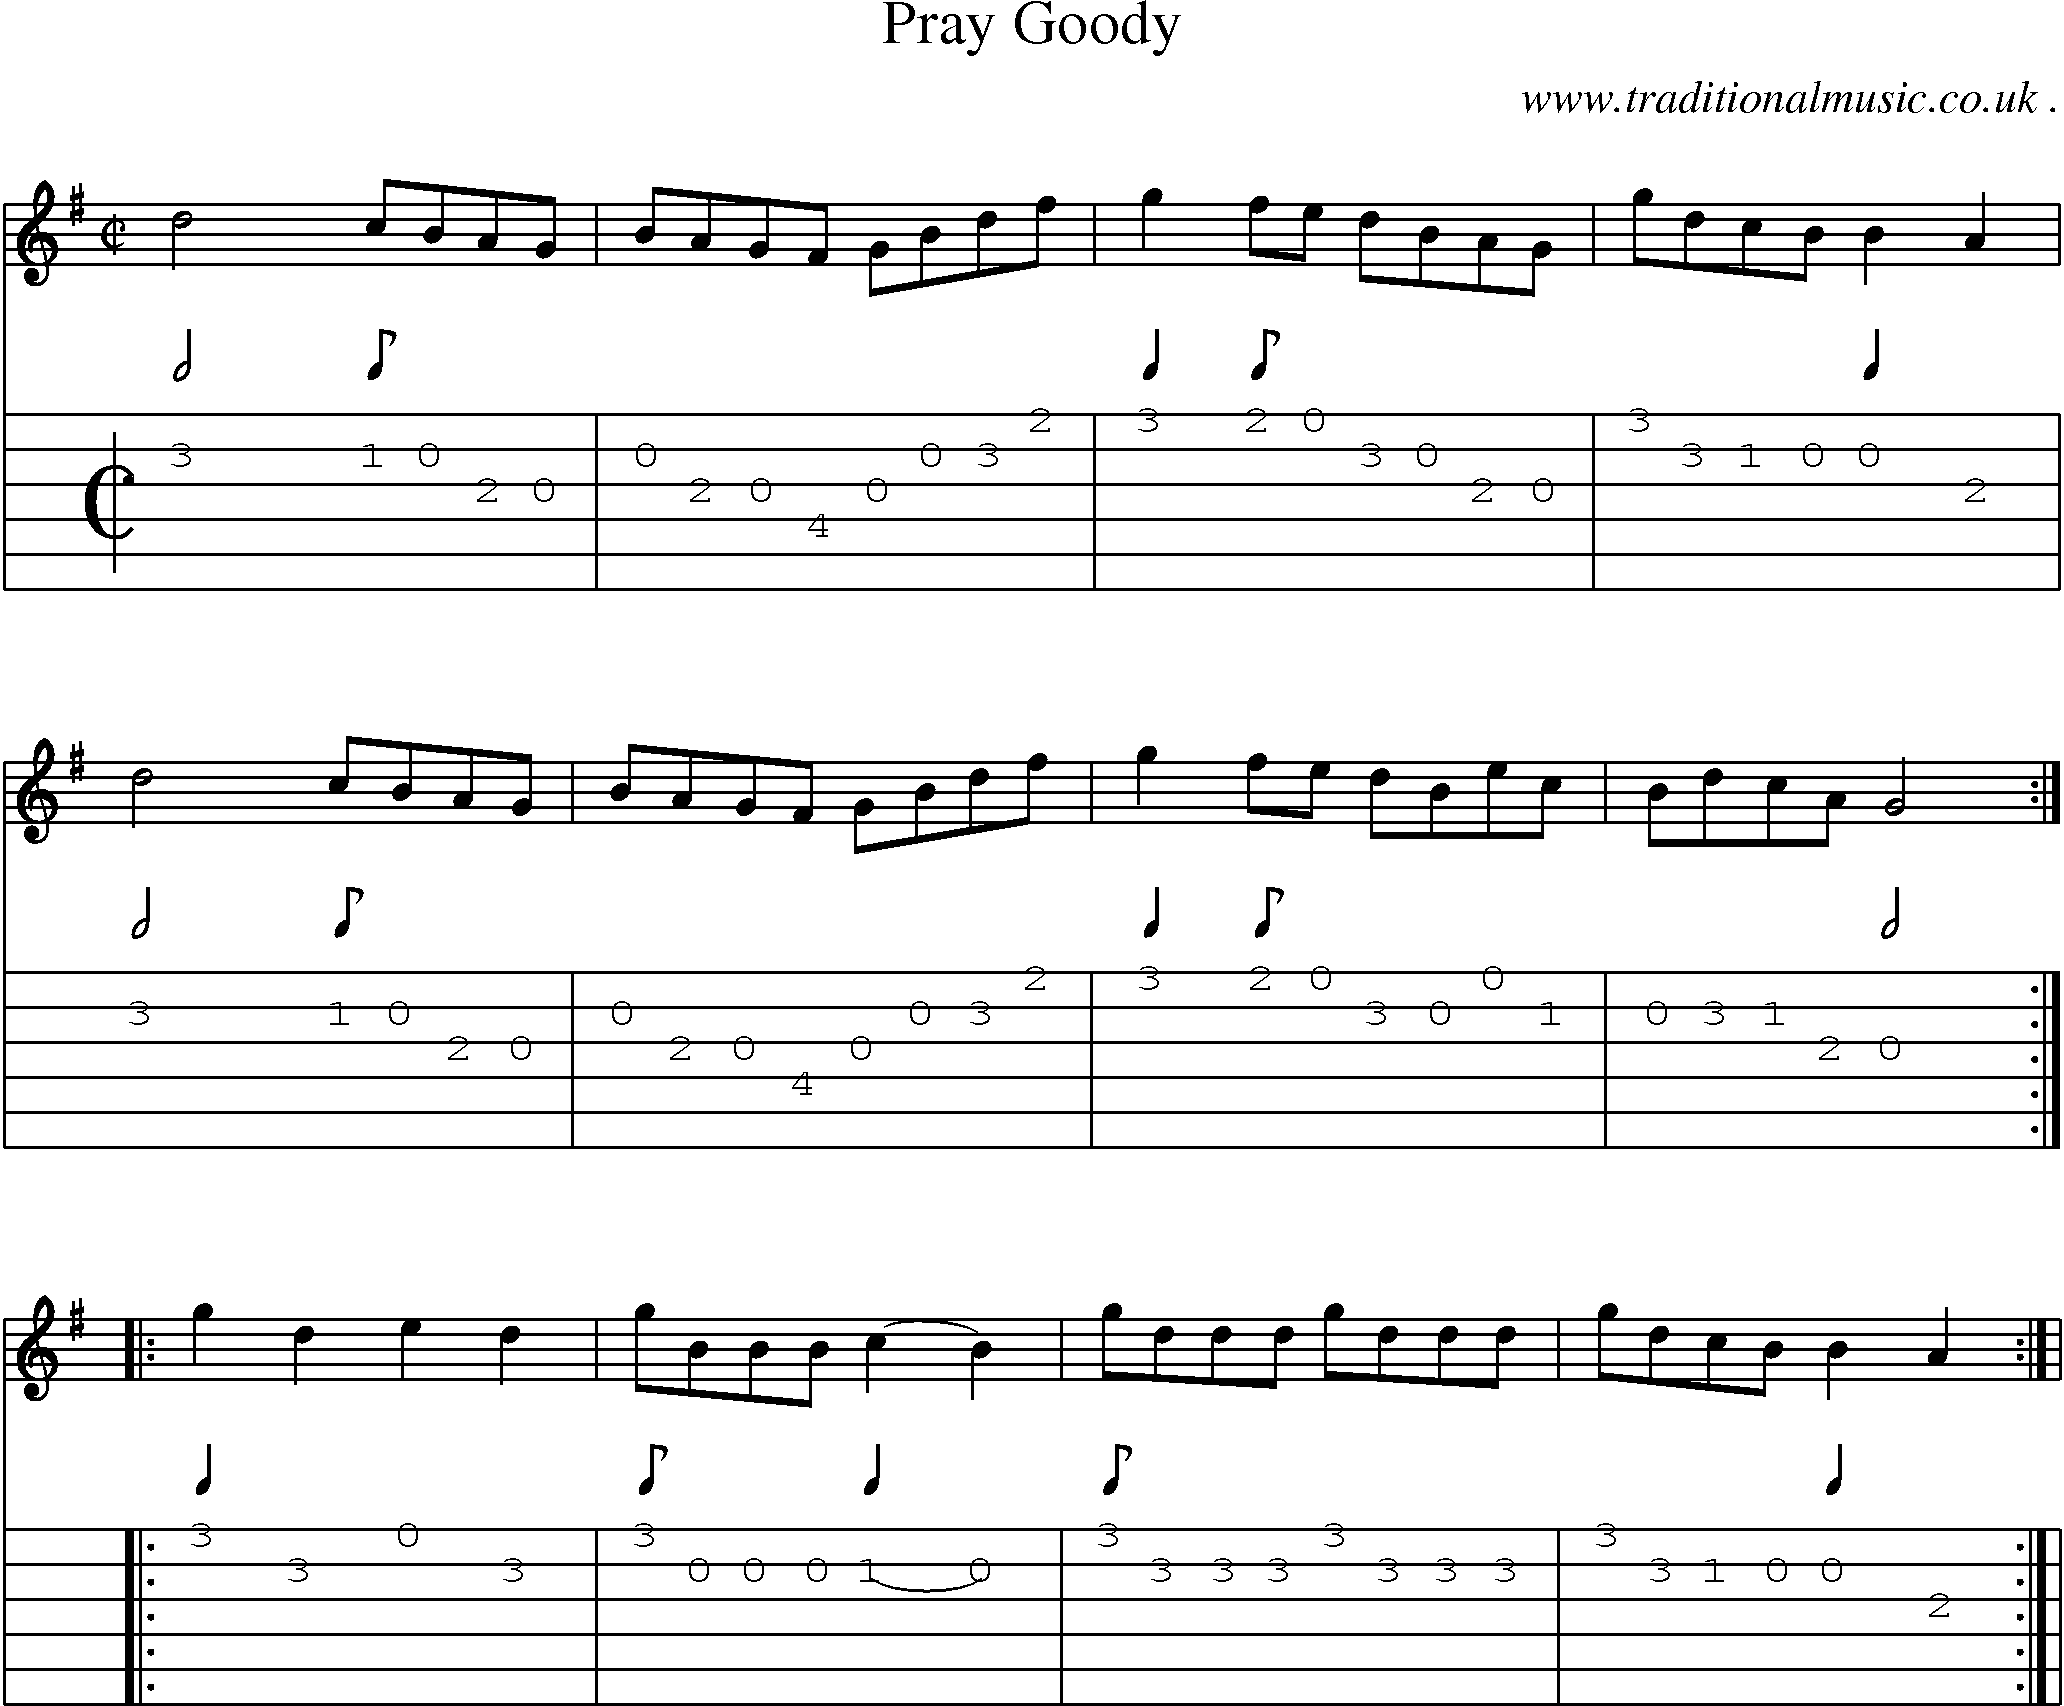 Sheet-Music and Guitar Tabs for Pray Goody